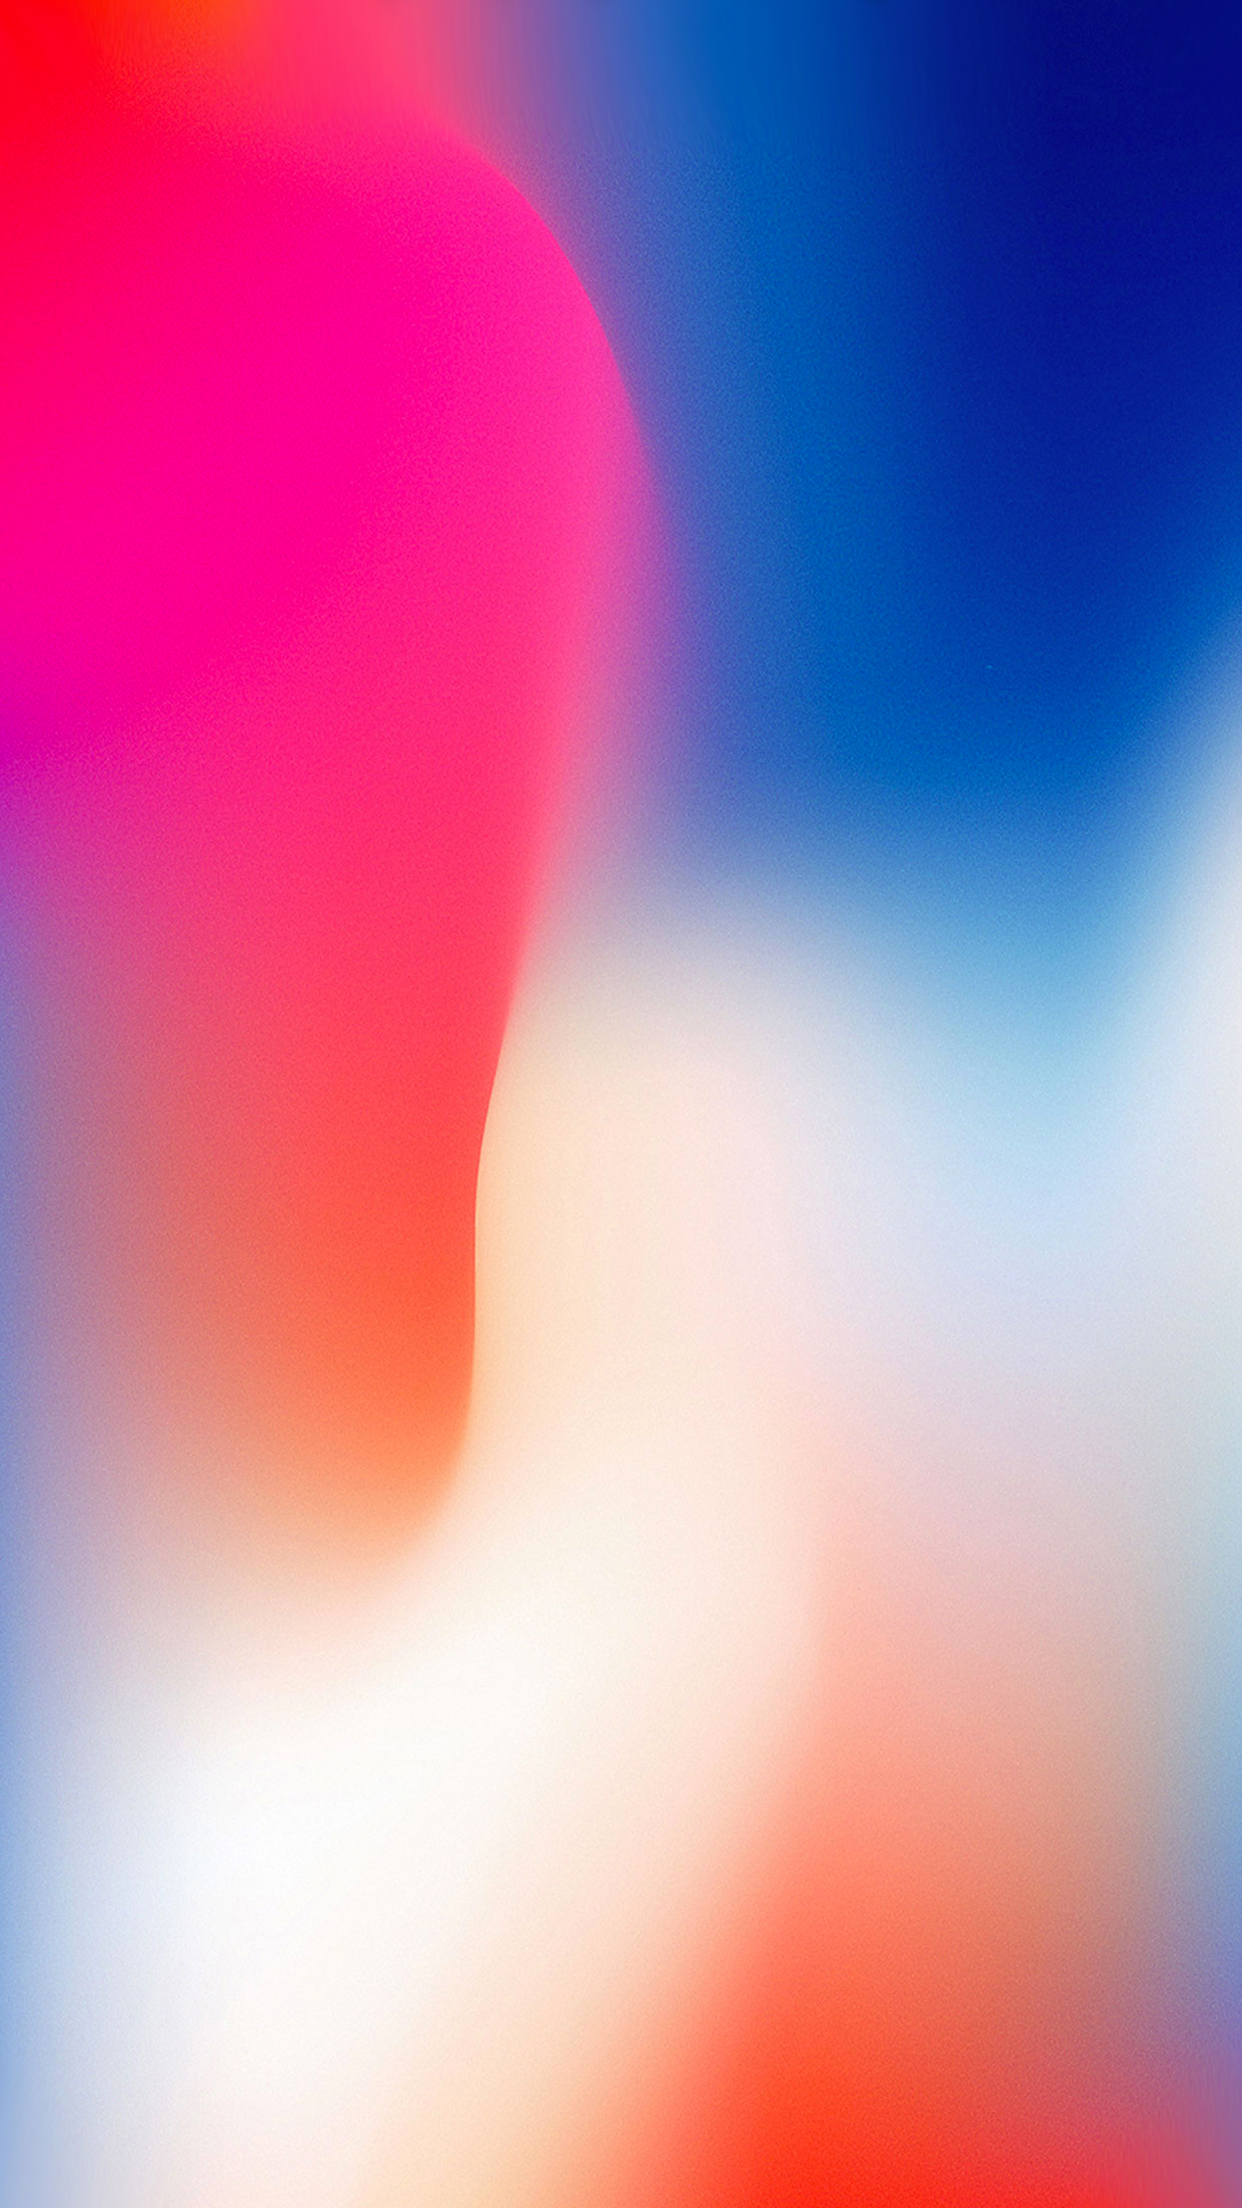 iPhone Wallpaper in High Quality: Original, Apple, Abstract, Nature, Space, and More